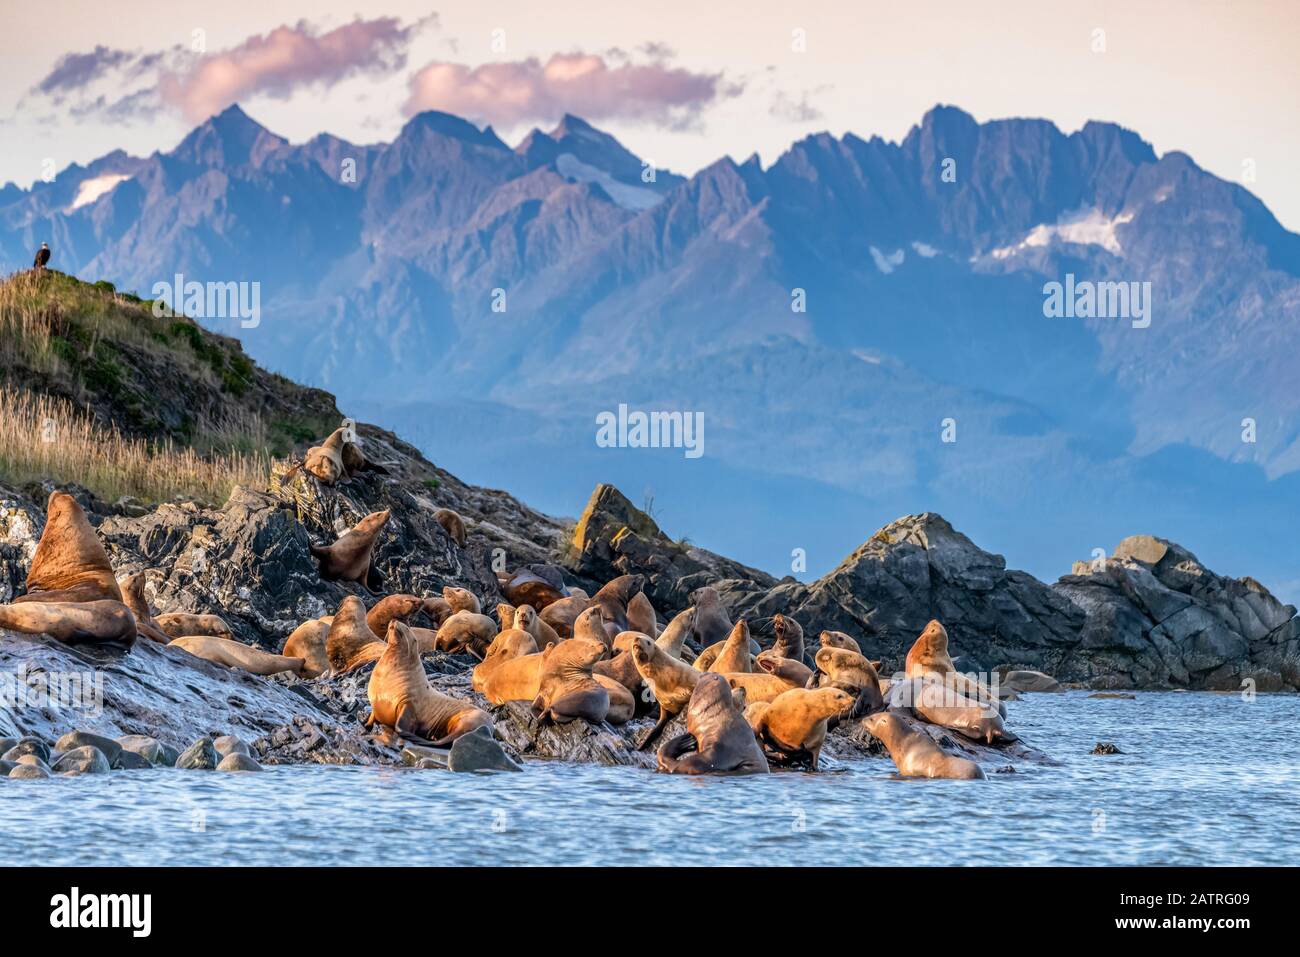 Sea lions leaving the water for shore along the coast of Alaska with a rugged mountain range in the background; Alaska, United States of America Stock Photo